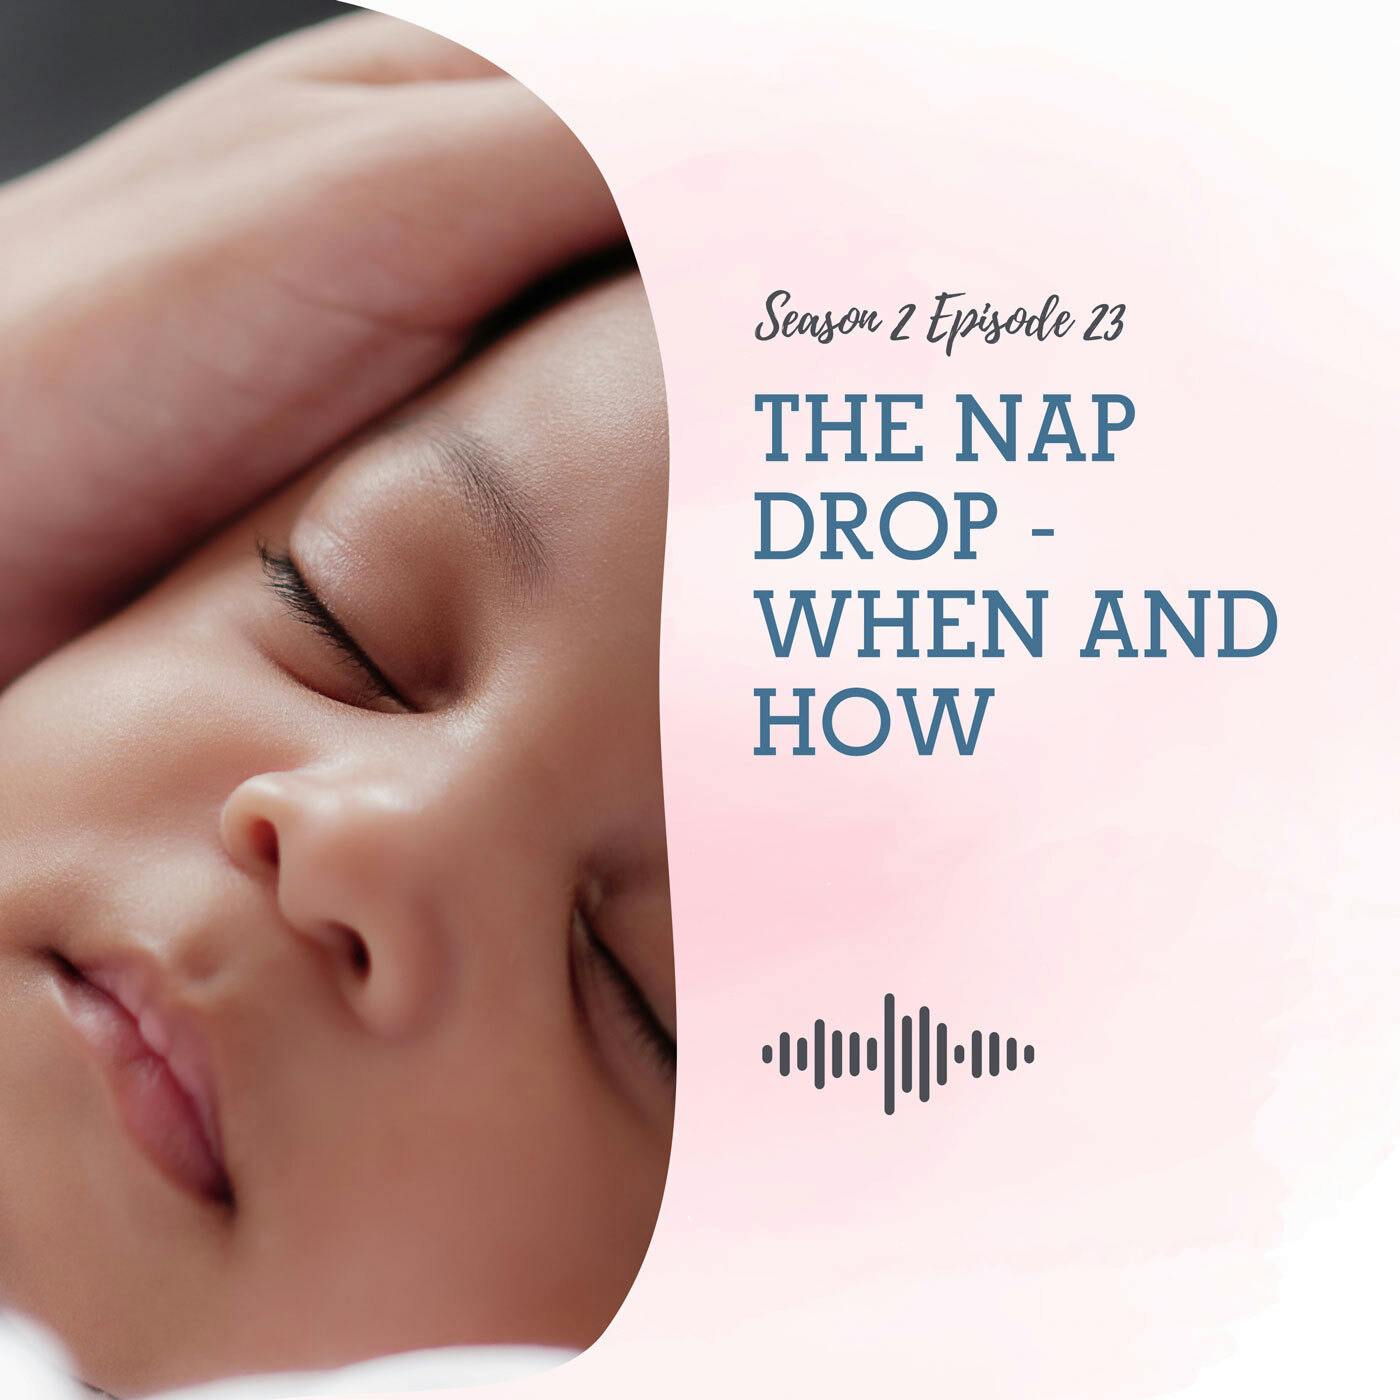 S2 EP23:  THE NAP DROP: WHEN AND HOW